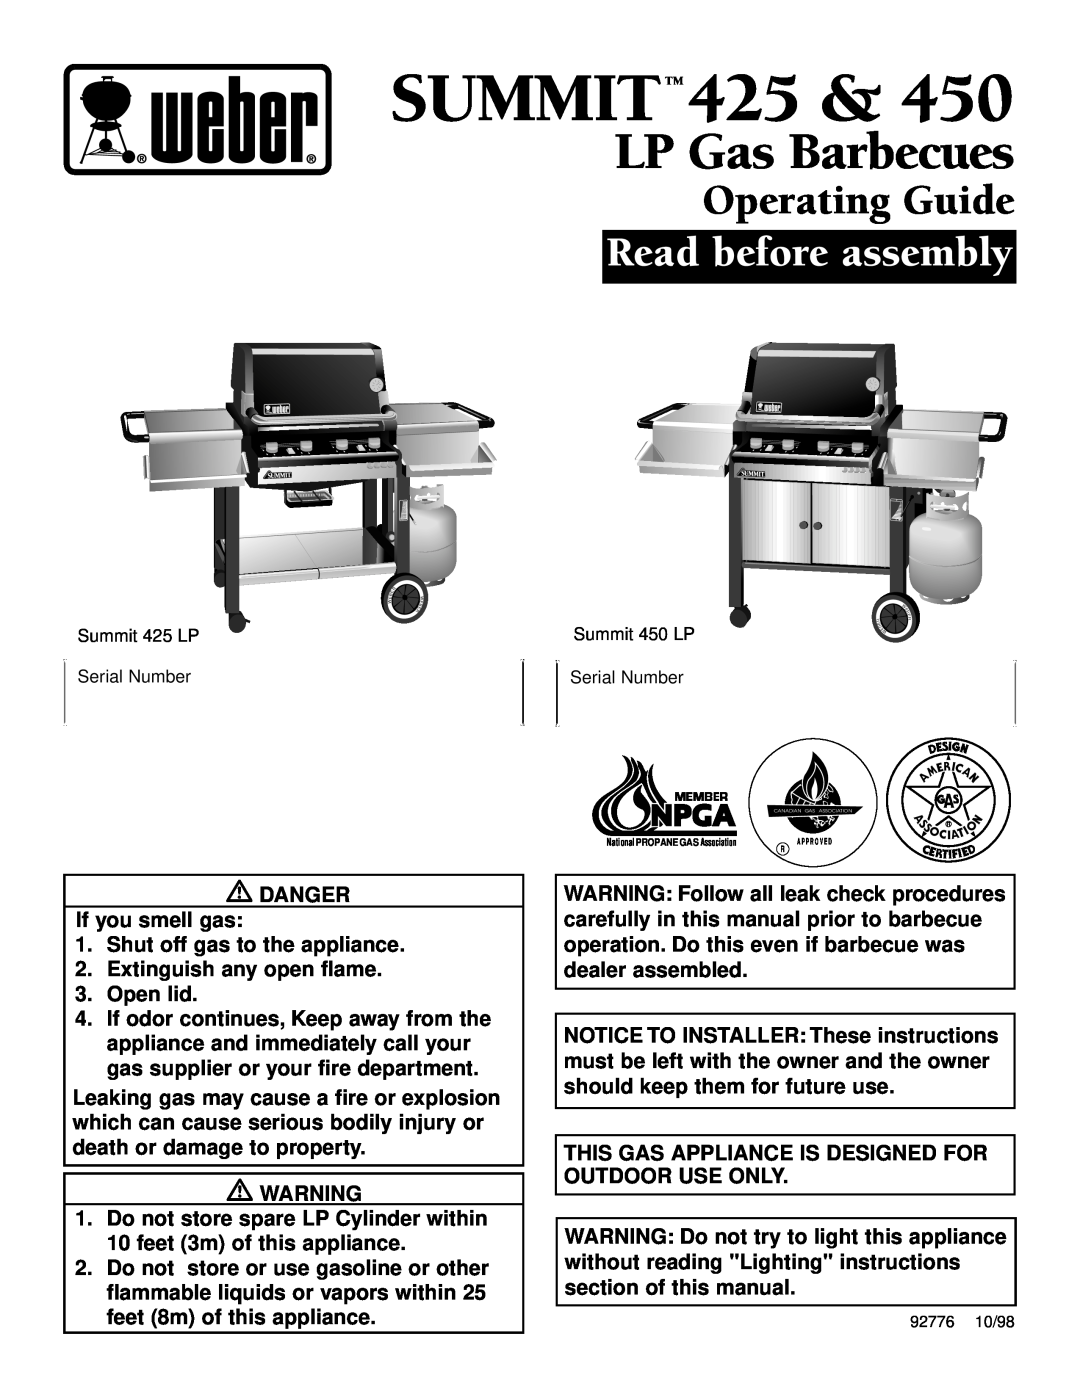 Weber manual Instructions, Gas Barbecue Rotisserie, Fits Summit 450 & 475 and 650 & 675 Gas Grills, Warnings 